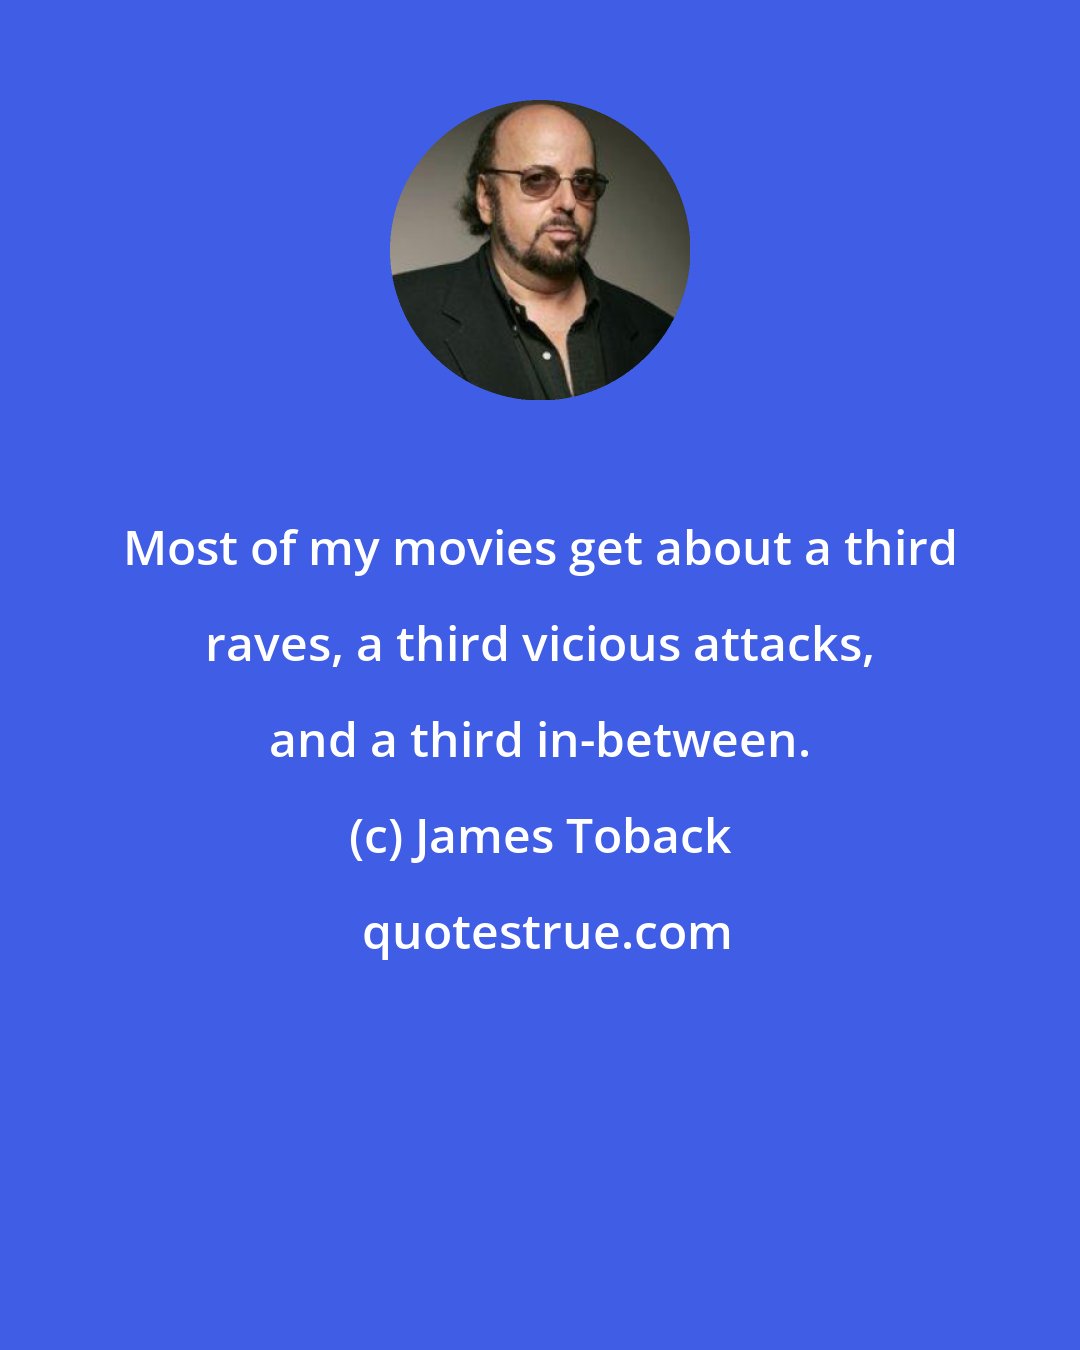 James Toback: Most of my movies get about a third raves, a third vicious attacks, and a third in-between.